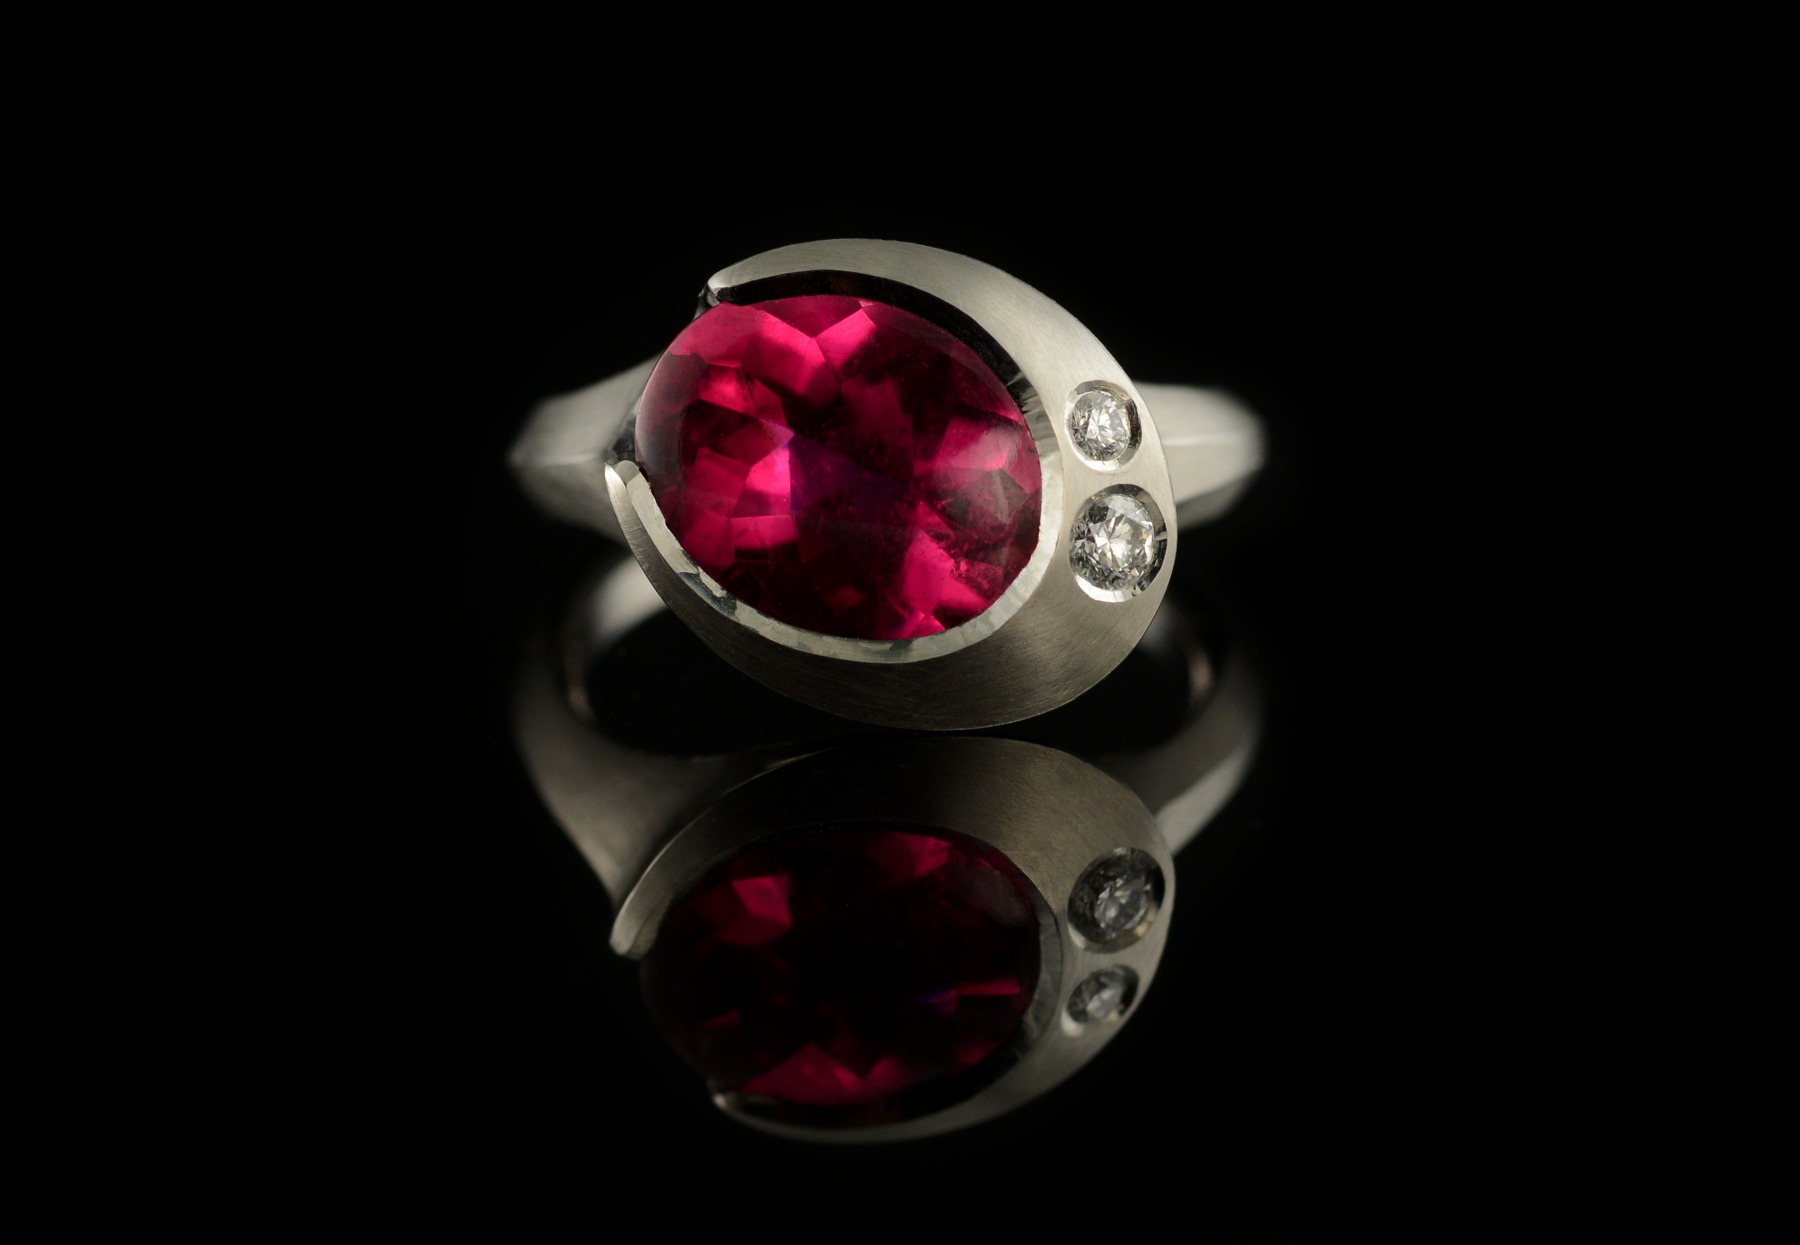 Arris platinum cocktail ring with rubellite tourmaline and white diamonds